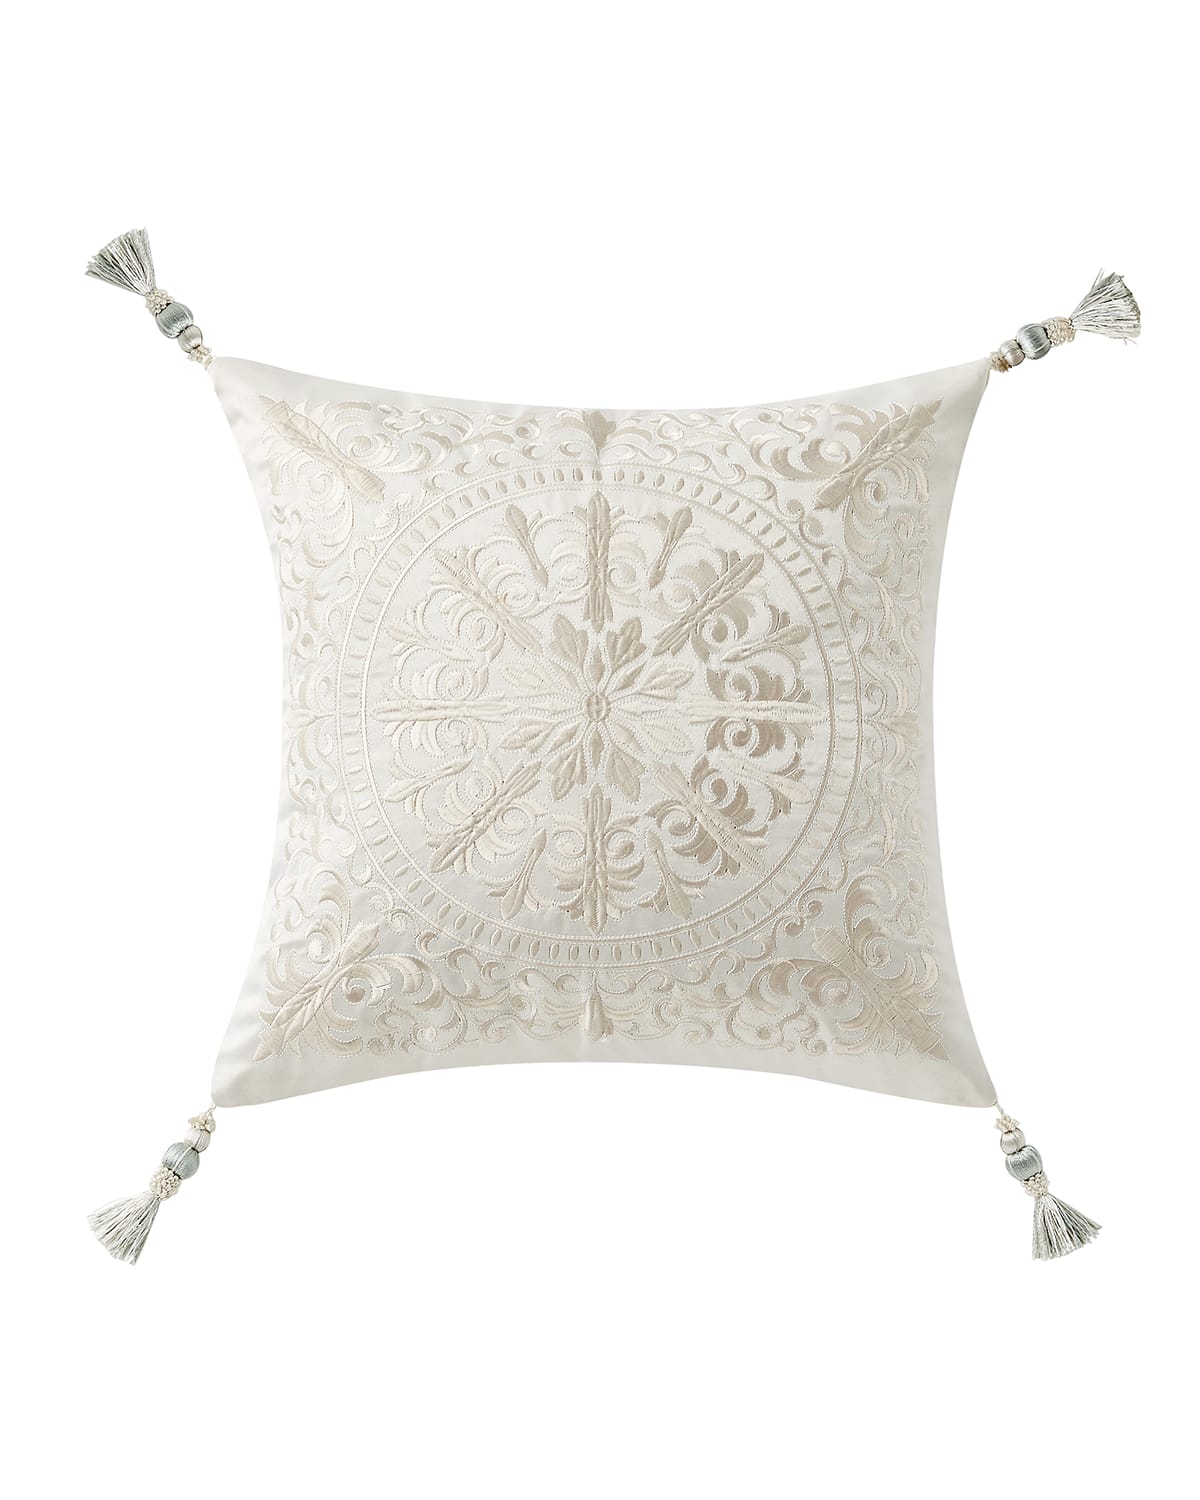 Image Waterford Daphne Embroidered Square Pillow w/ Tassel Trim